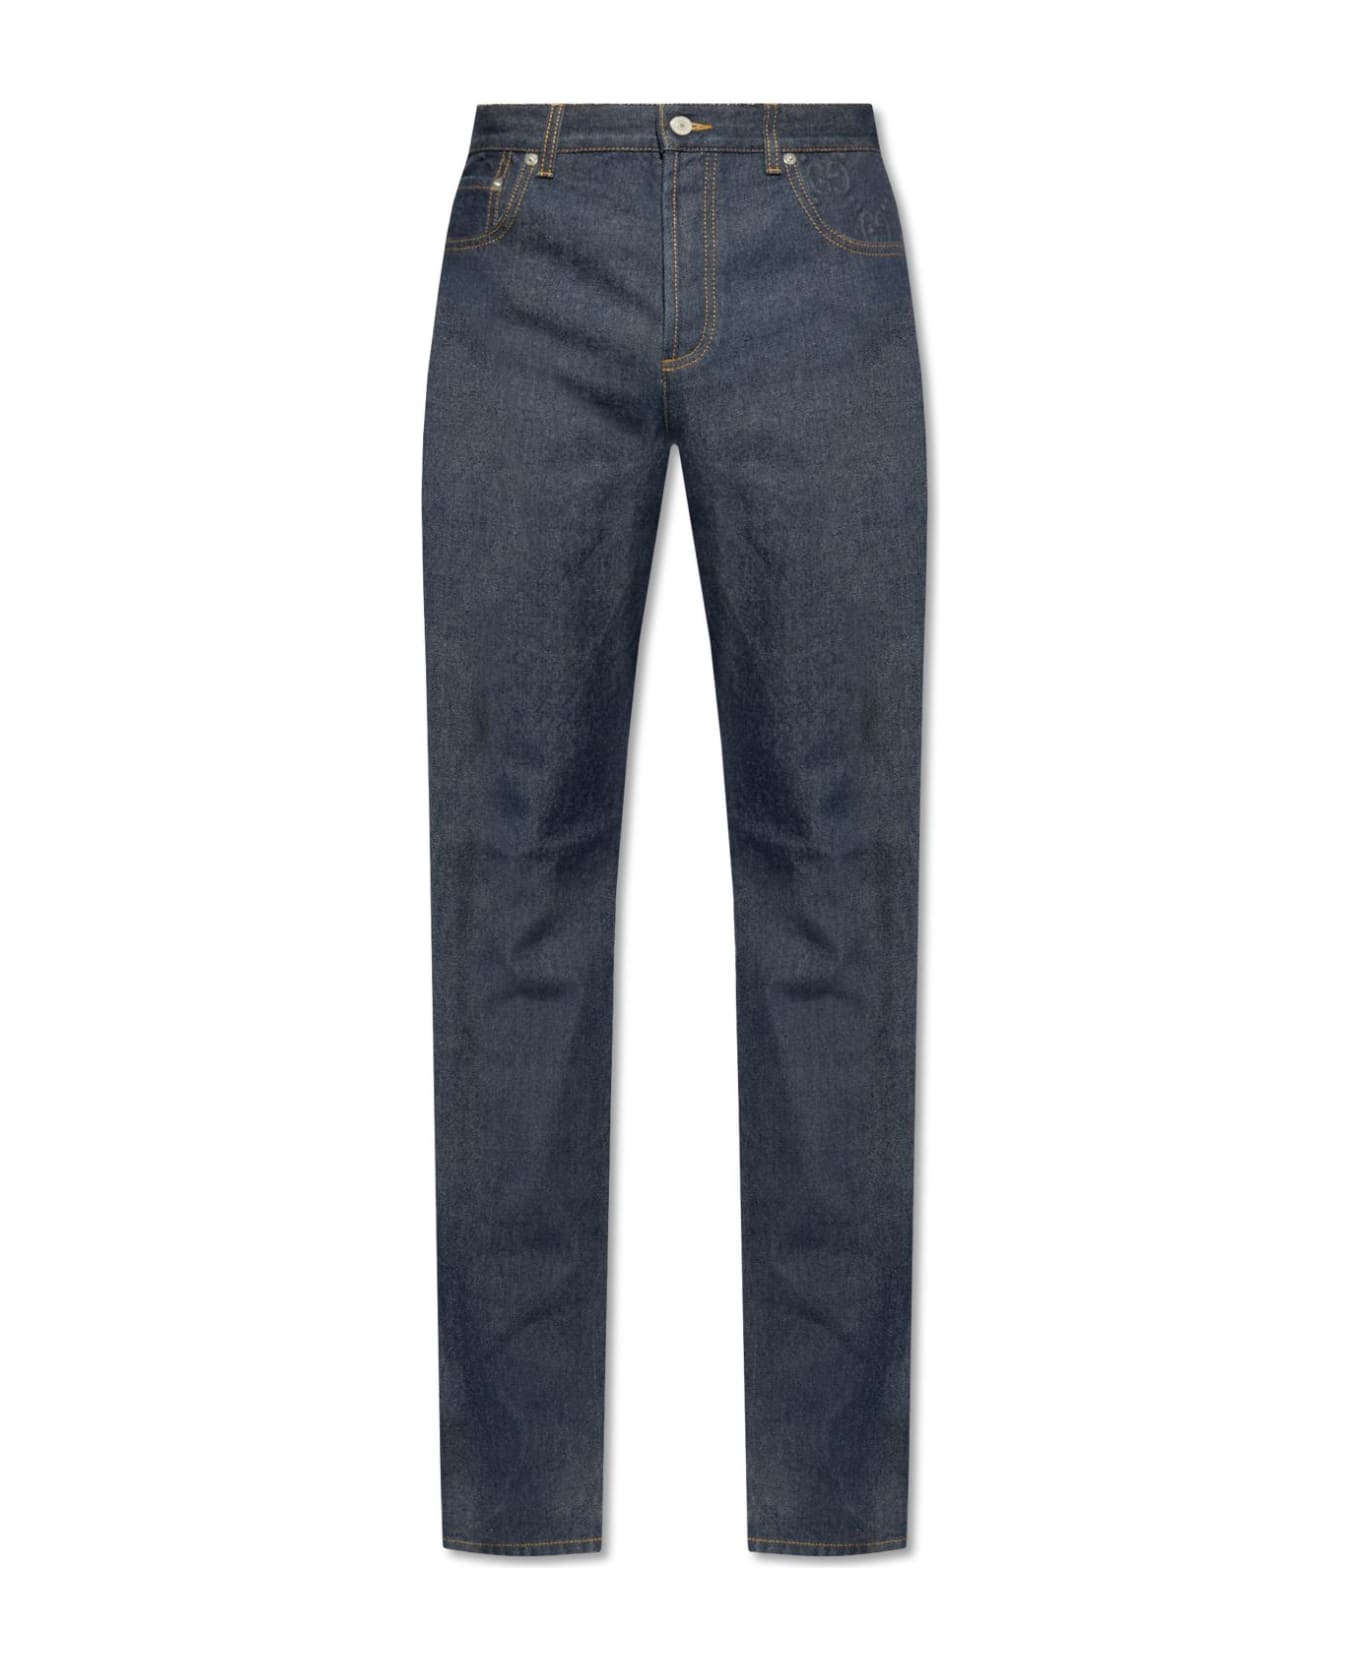 Gucci Jeans With Straight Legs - DARKBLUE デニム